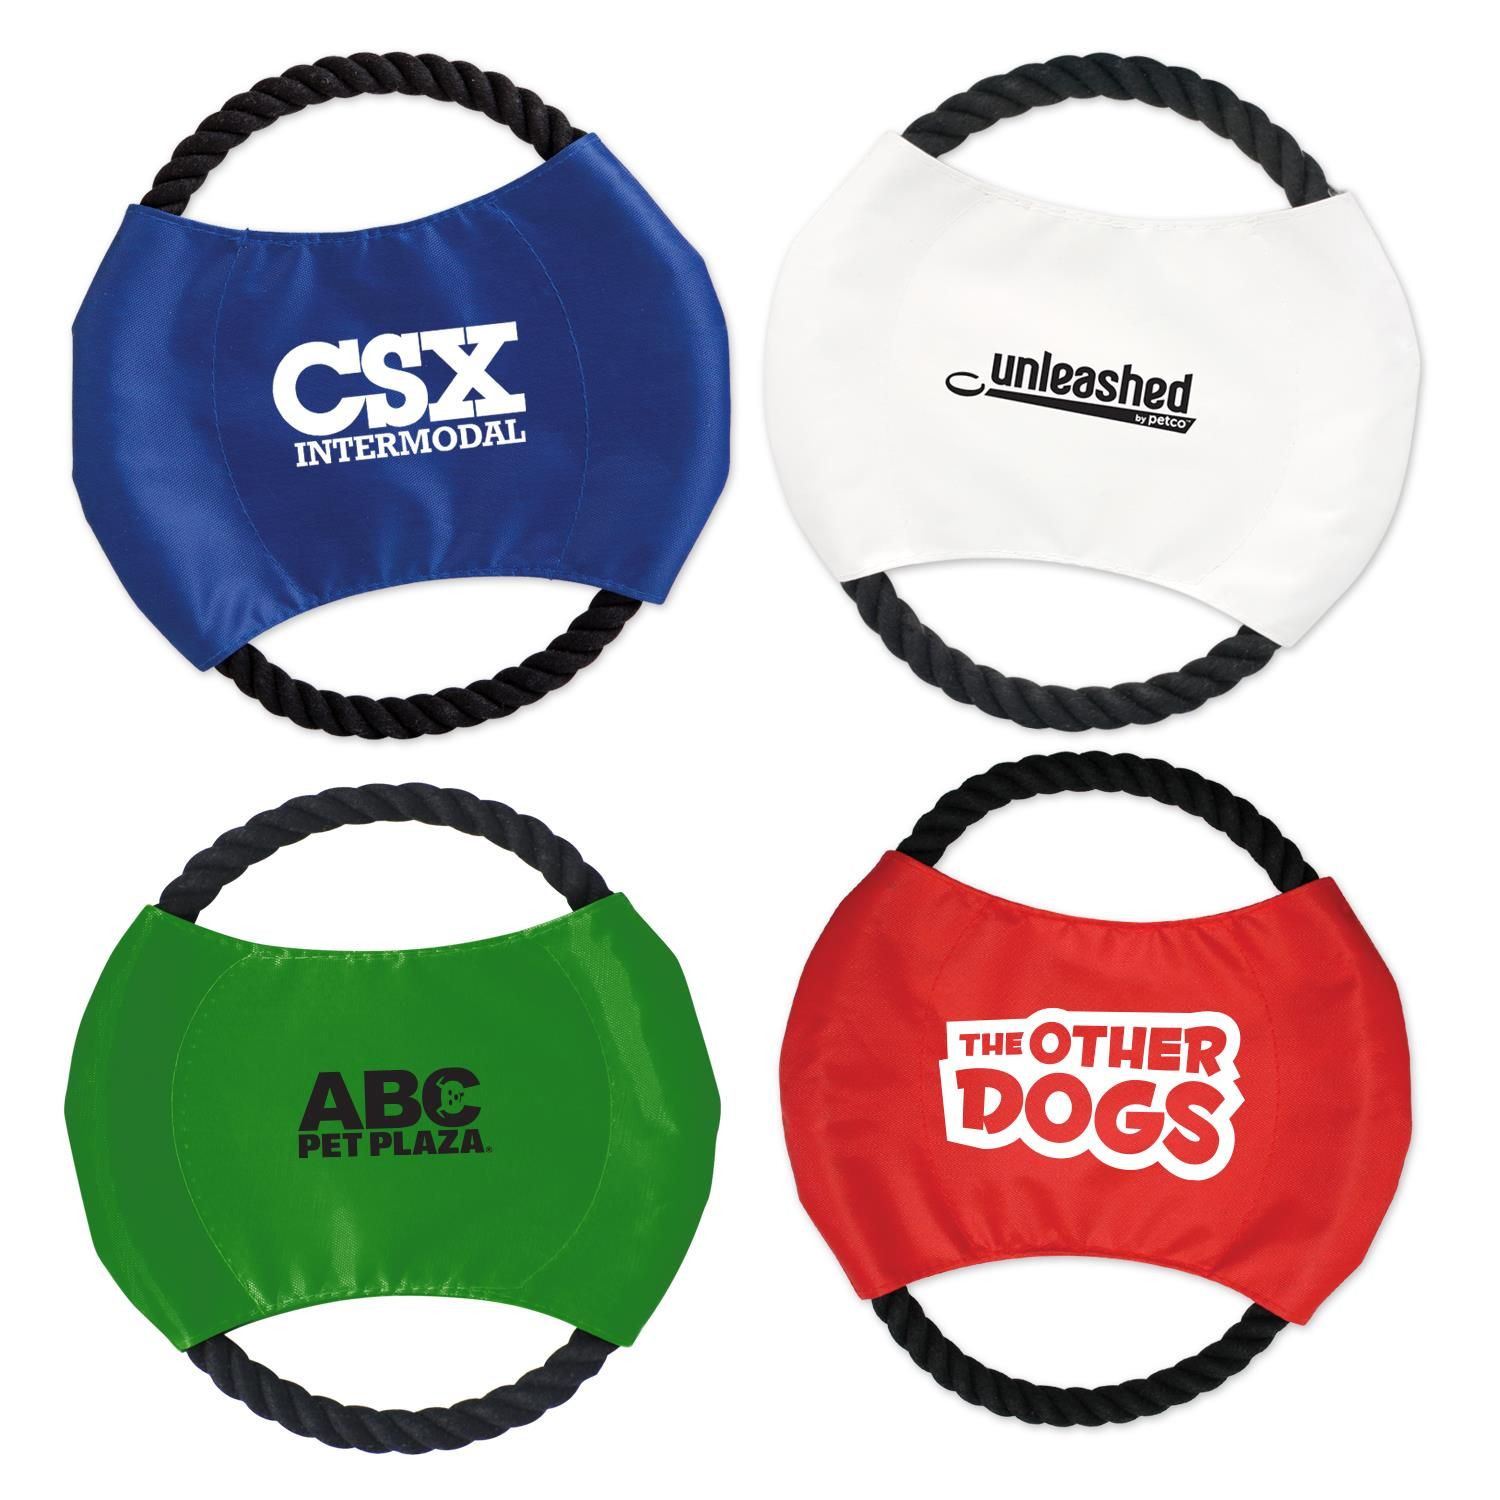 Branded rope disk toy in multiple colors